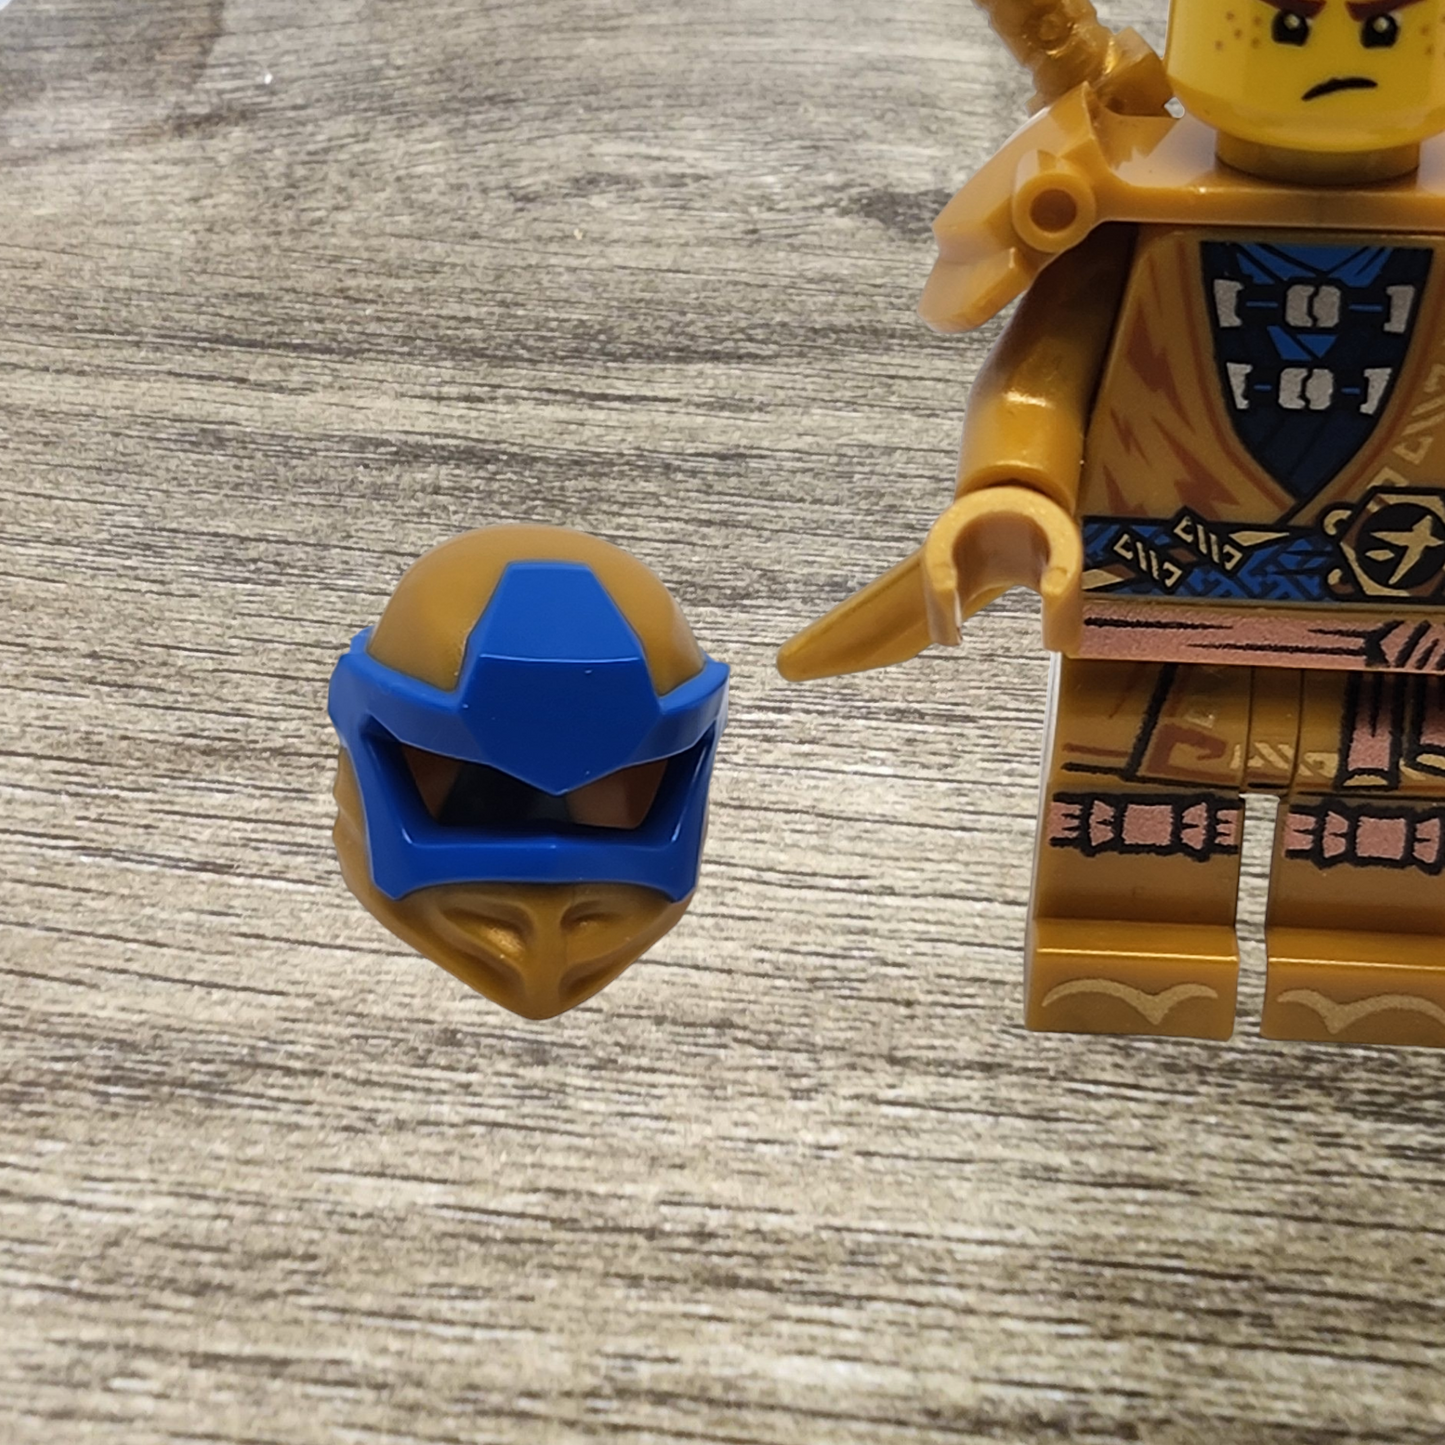 Jay Pearl Gold Robes Legacy Minifigure Lego Njo634